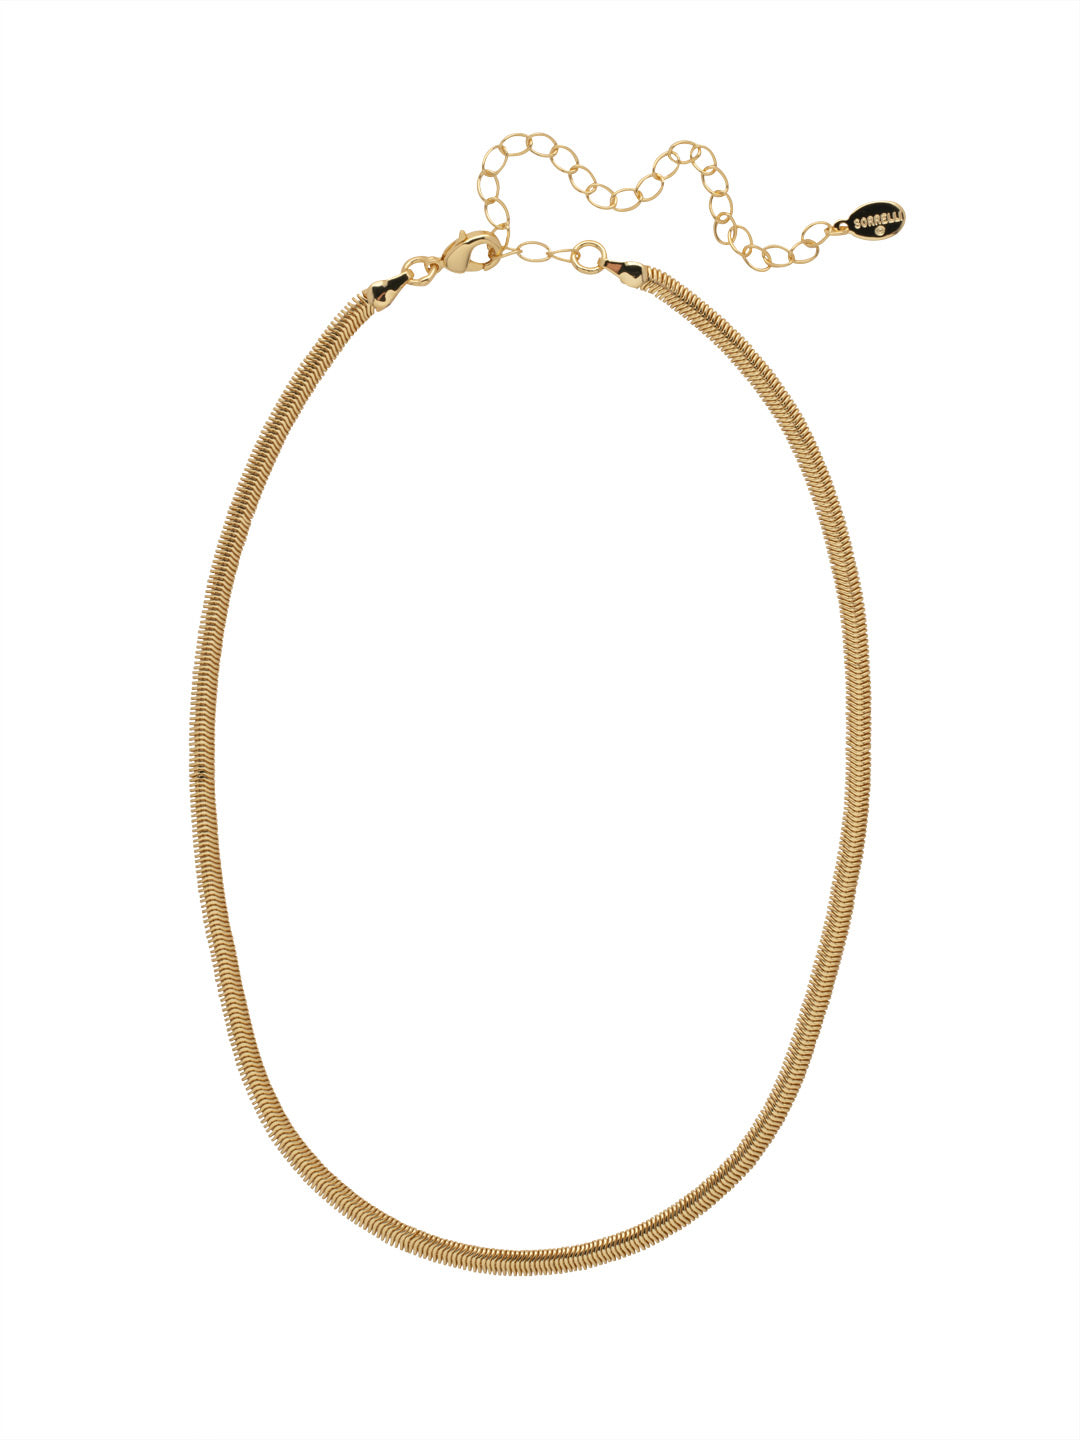 Mini Juna Tennis Necklace - 4NFF7BGMTL - <p>The Mini Juna Tennis Necklace features a single, adjustable herringbone (or snake) chain secured with a lobster claw clasp. From Sorrelli's Bare Metallic collection in our Bright Gold-tone finish.</p>